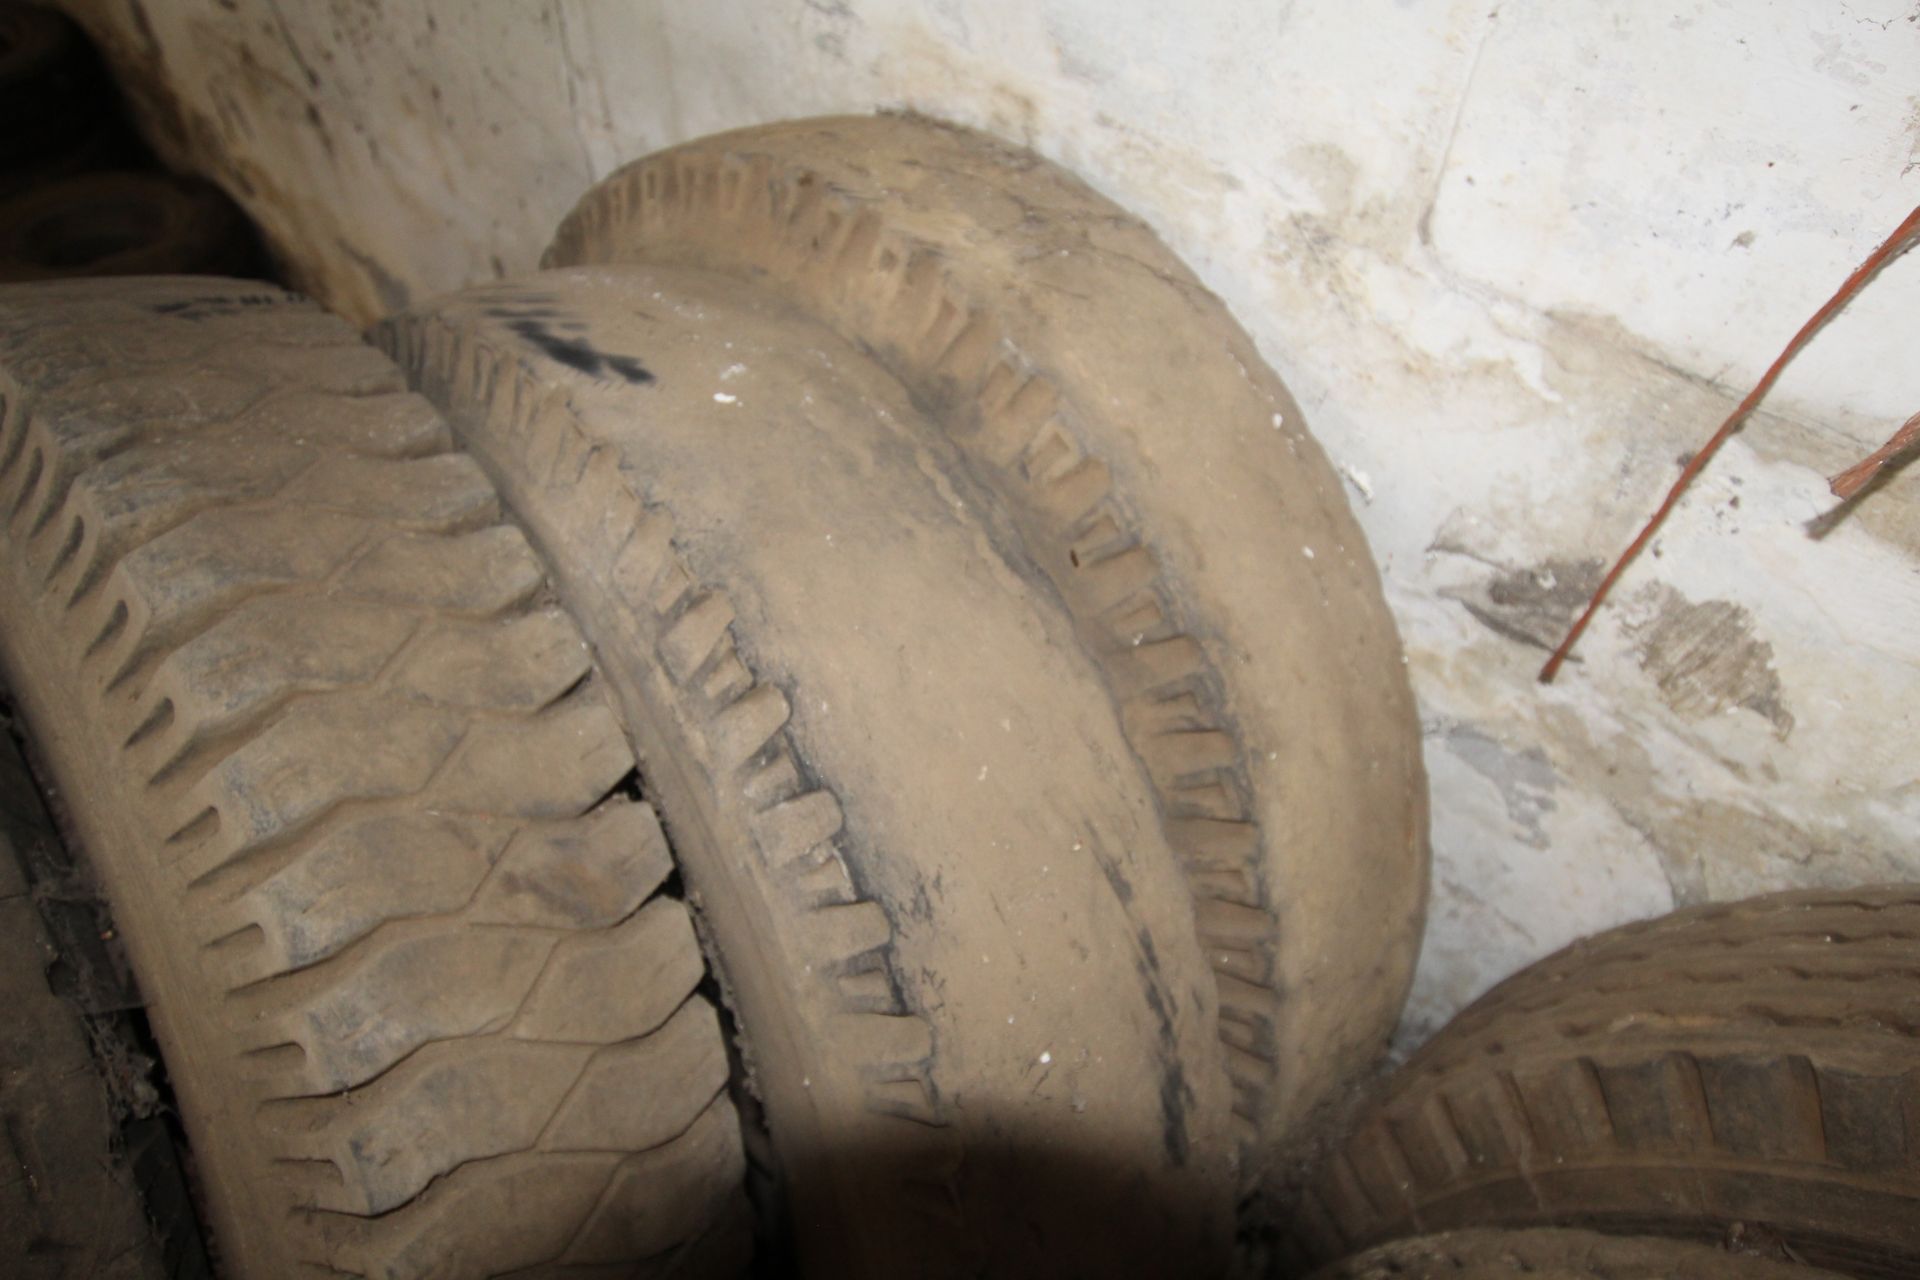 6x various lorry twin wheels and tyres. - Image 4 of 6